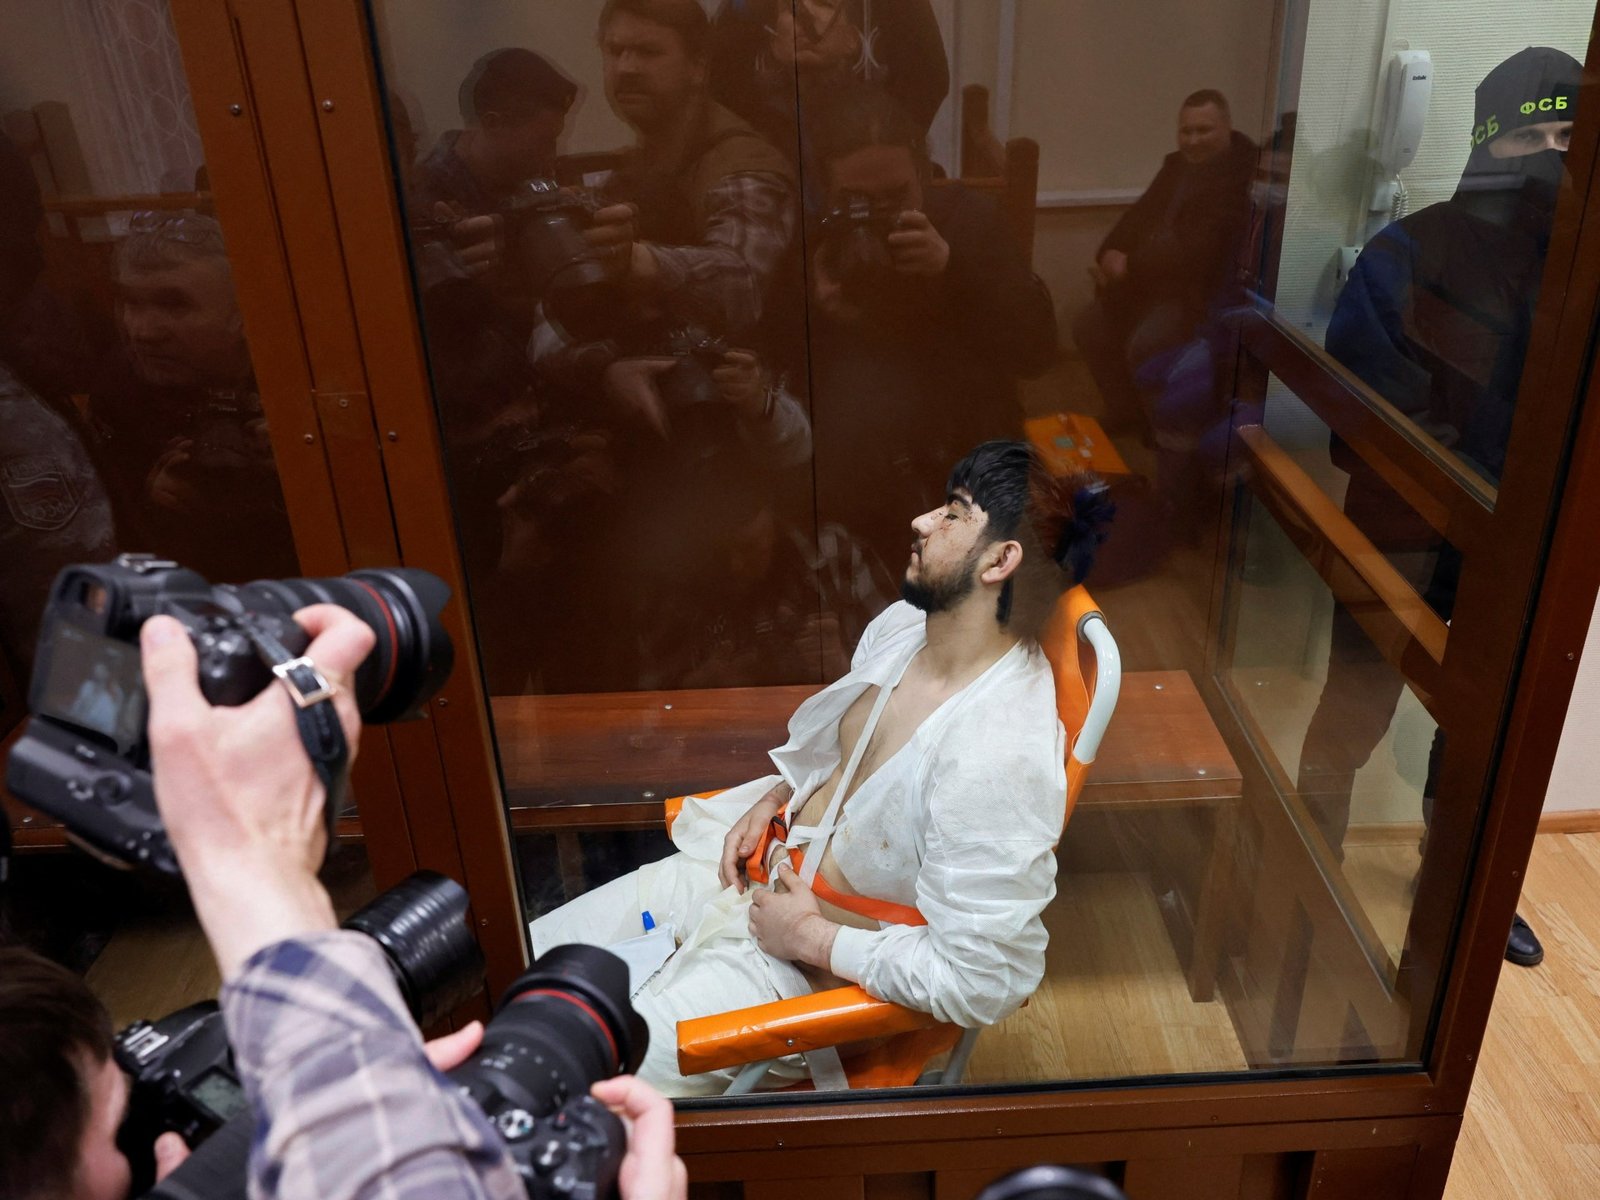 Moscow theatre attack suspects show signs of beating in court | ISIL/ISIS